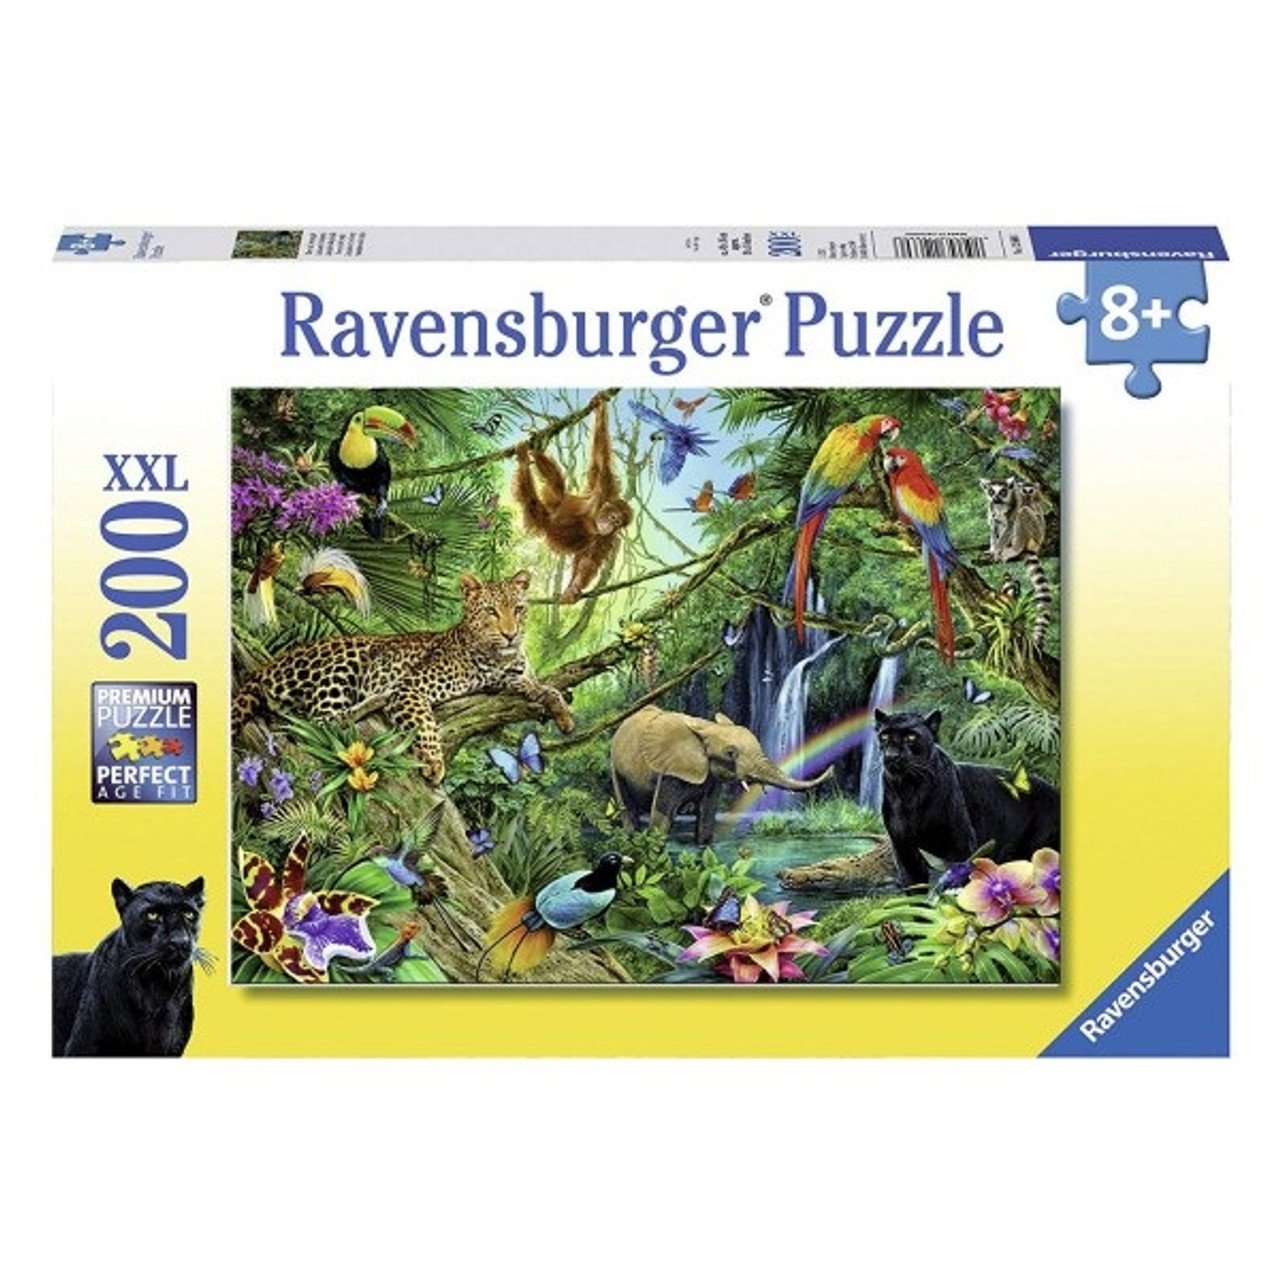 Ravensburger 200pc Animals in the Jungle Jigsaw Puzzle